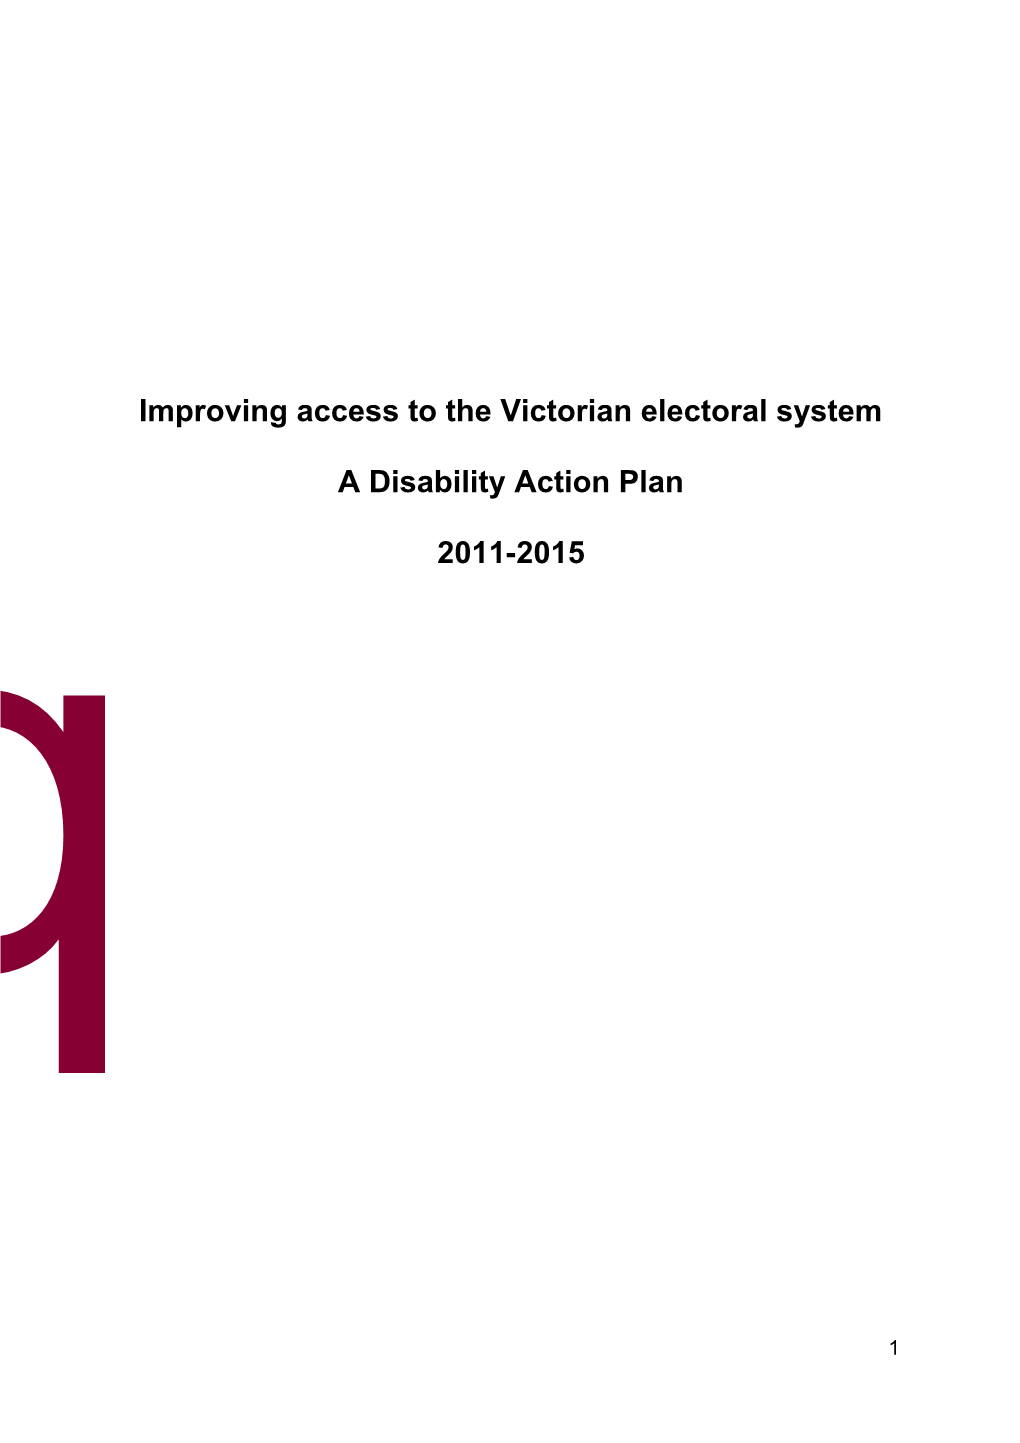 Improving Access to the Victorian Electoral System